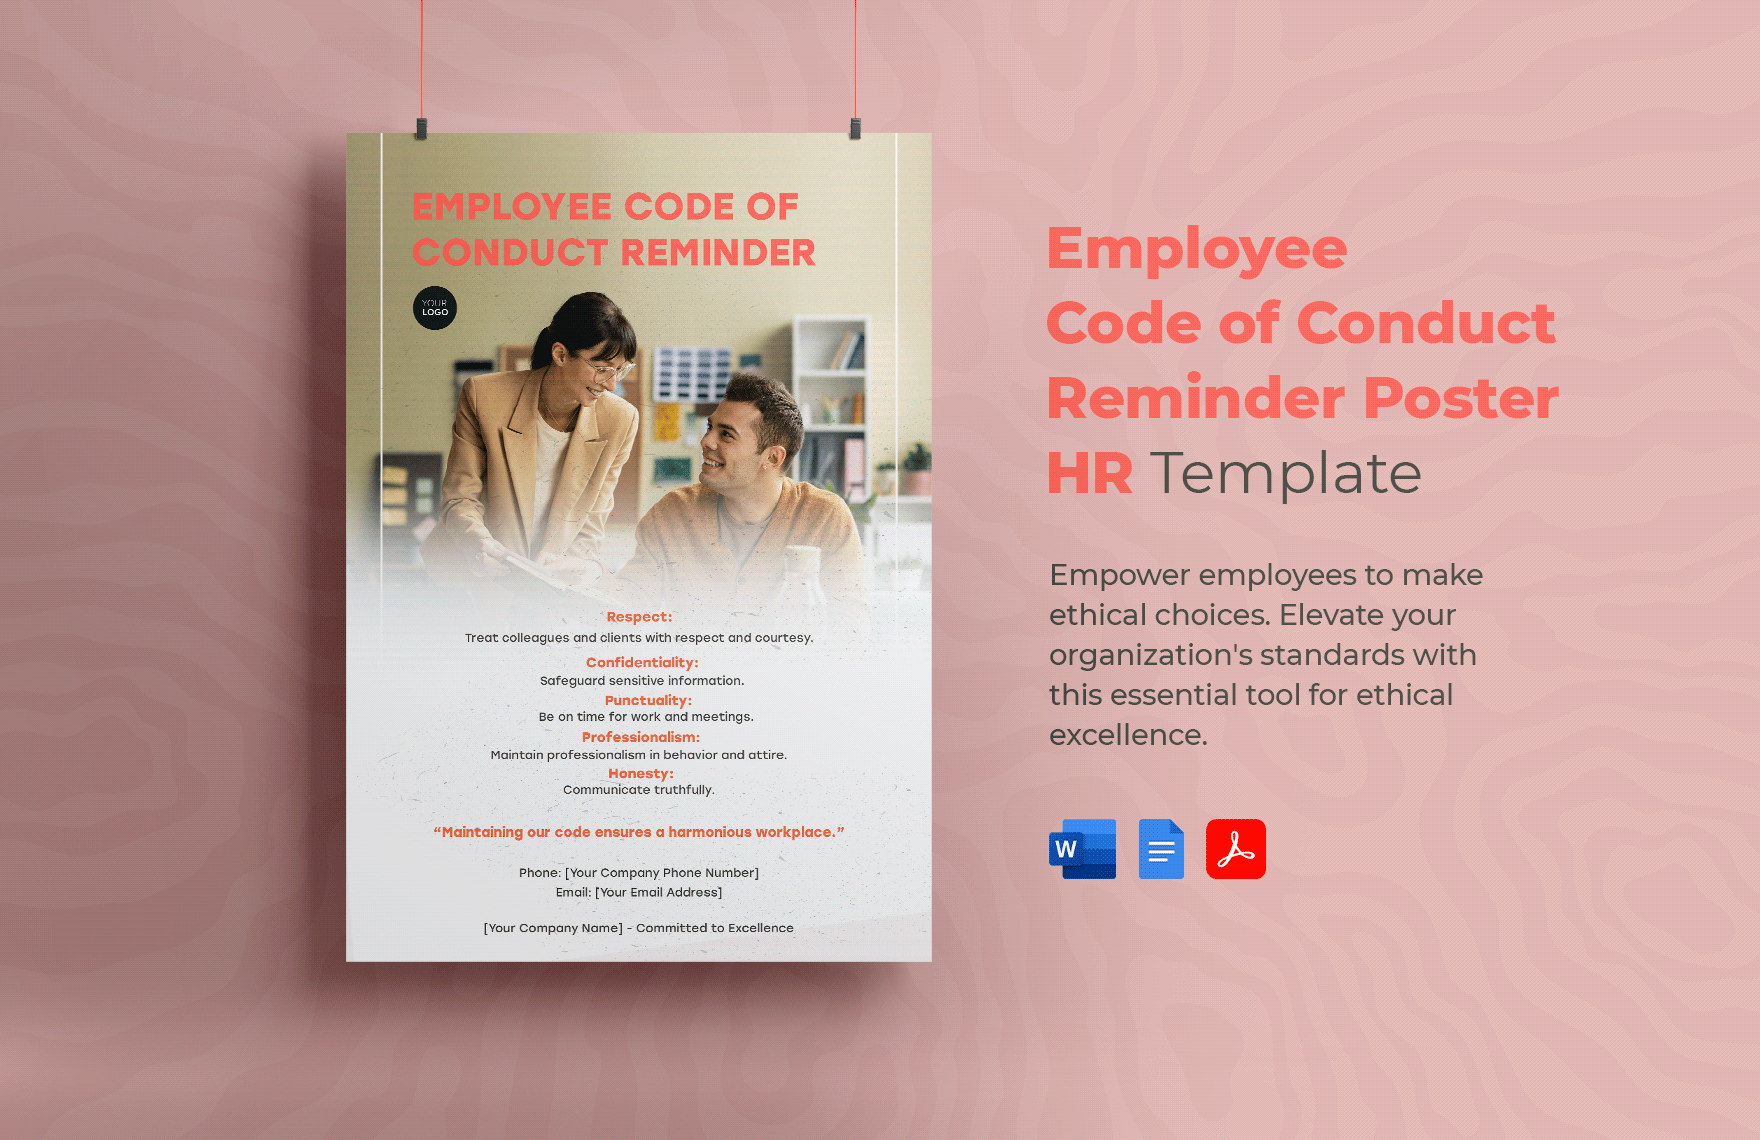 Employee Code of Conduct Reminder Poster HR Template